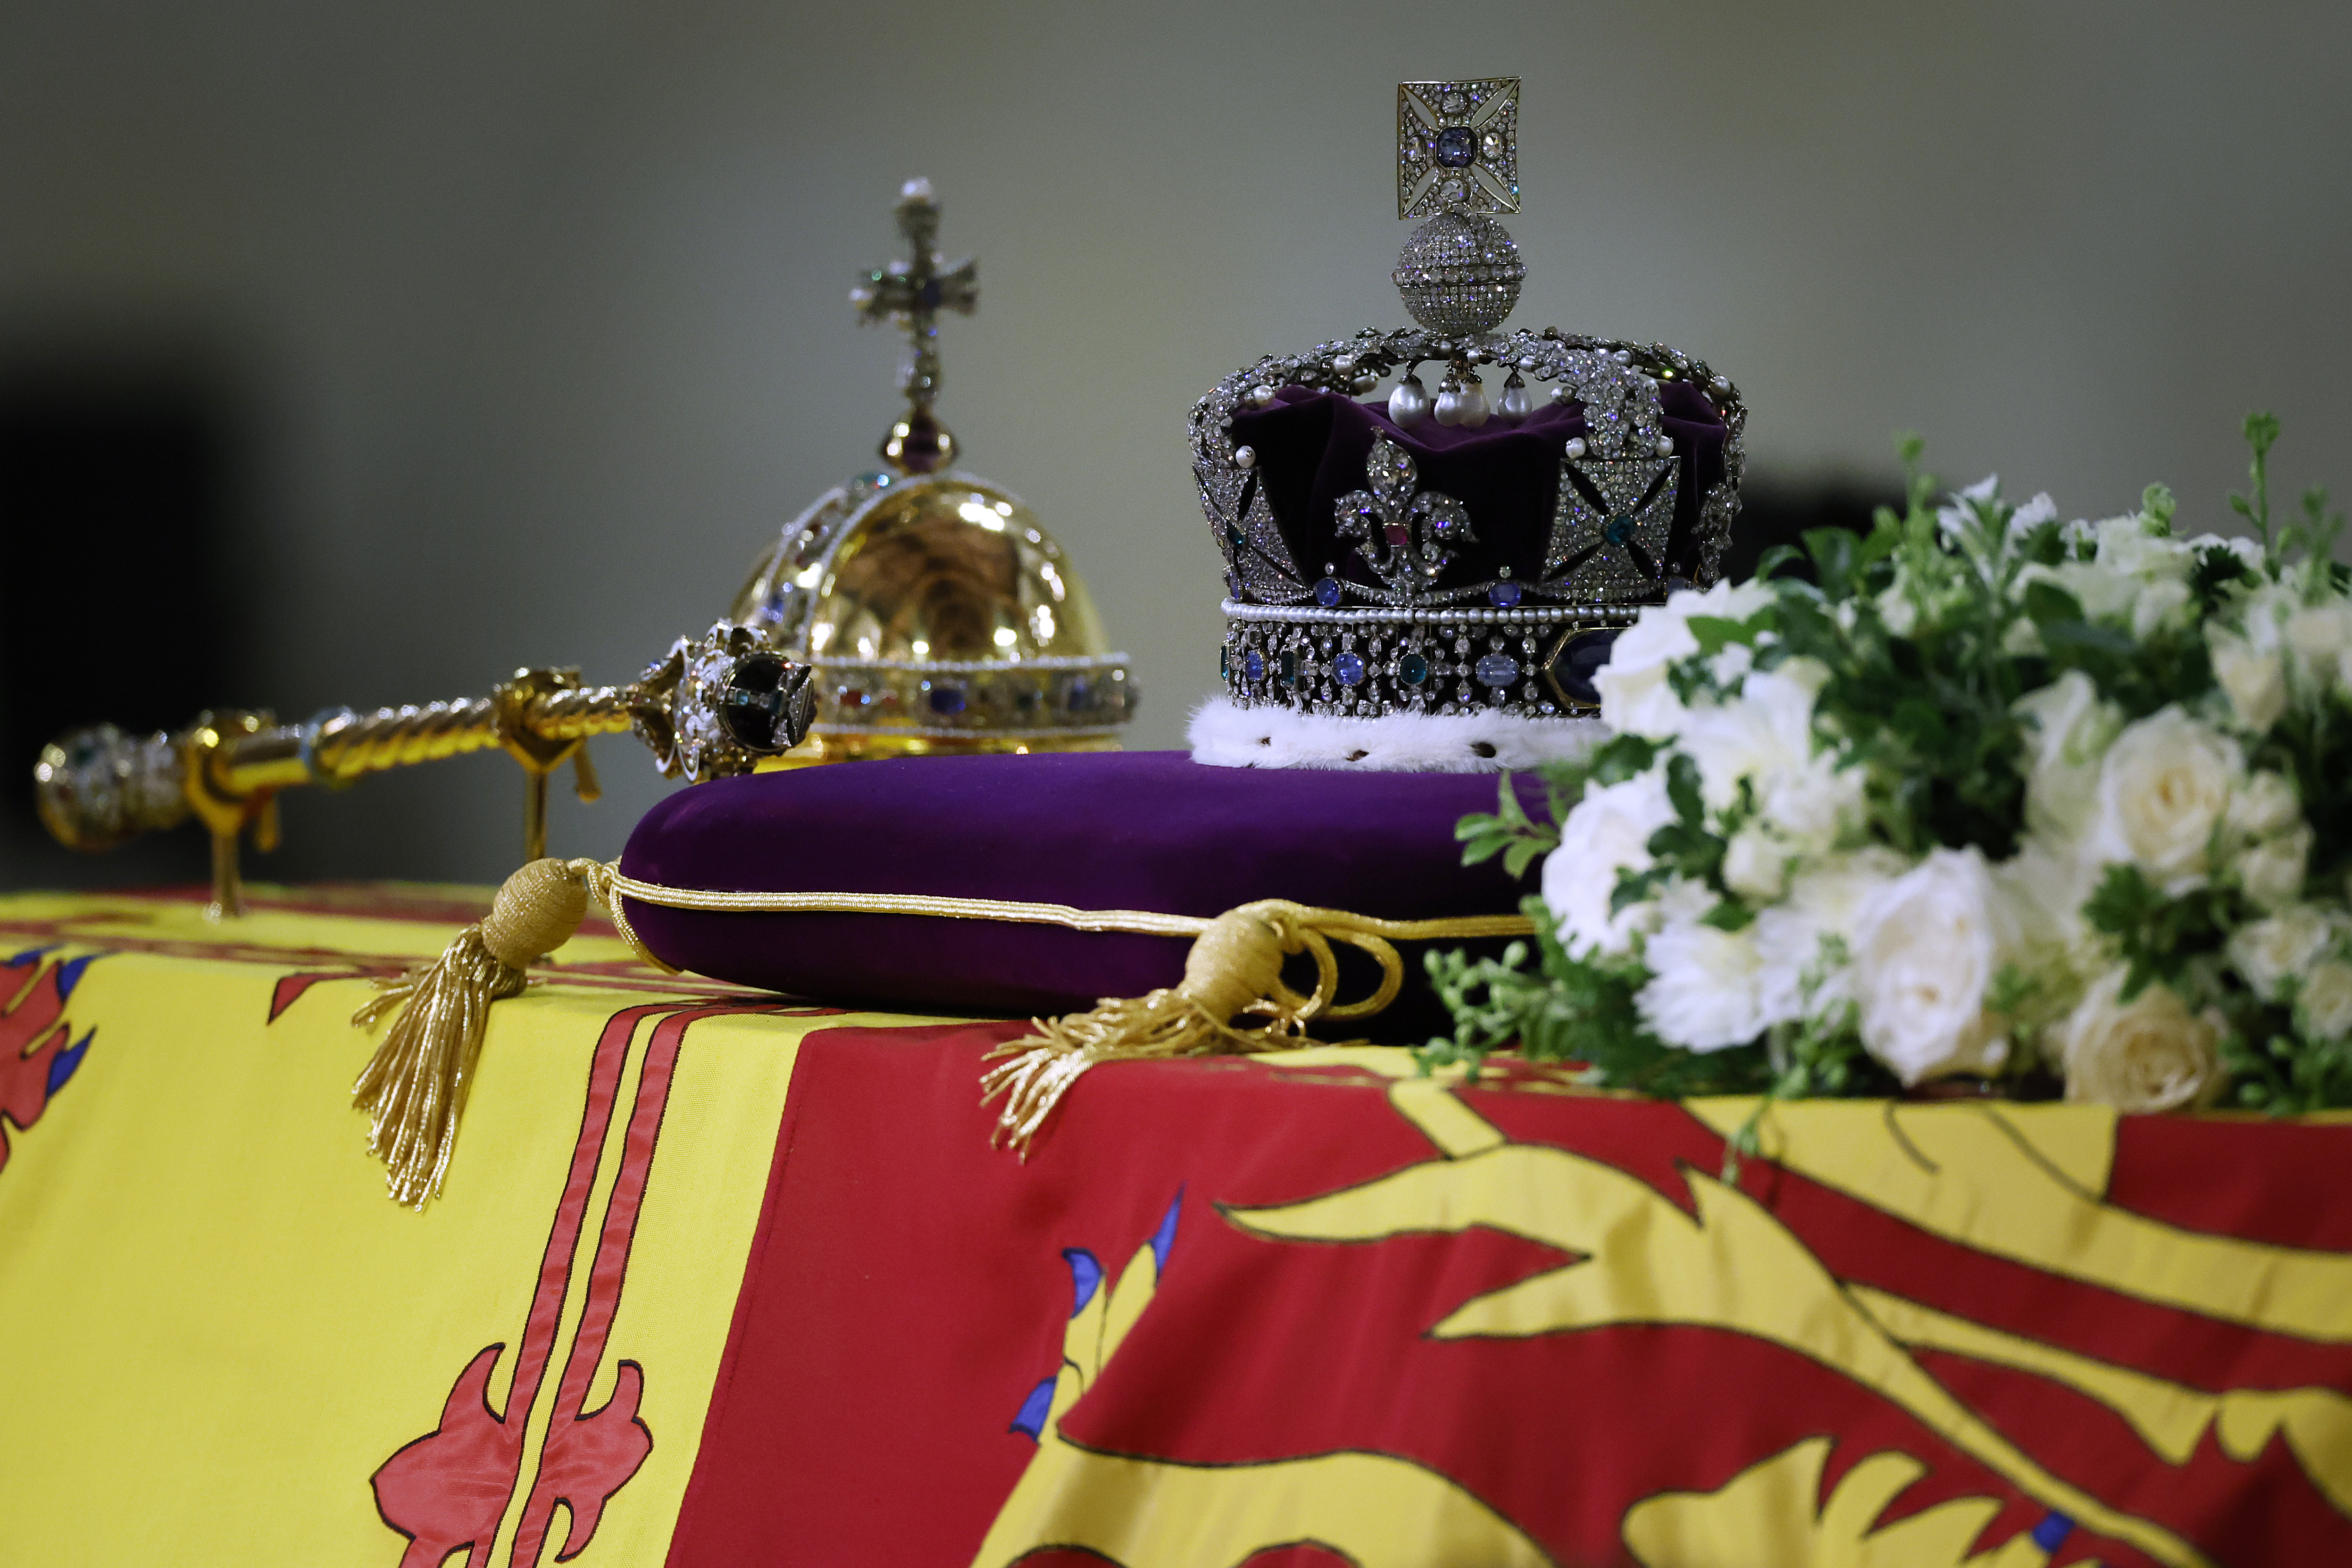 The coffin of Queen Elizabeth II, draped in the Royal Standard with the Imperial State Crown and the Sovereign's orb and sceptre as it lies in state on the catafalque in Westminster Hall, at the Palace of Westminster, London, early Saturday Sept. 17, 2022. The Queen will lie in state in Westminster Hall for four full days before her funeral on Monday Sept. 19. (Chip Somodevilla/Pool via AP)